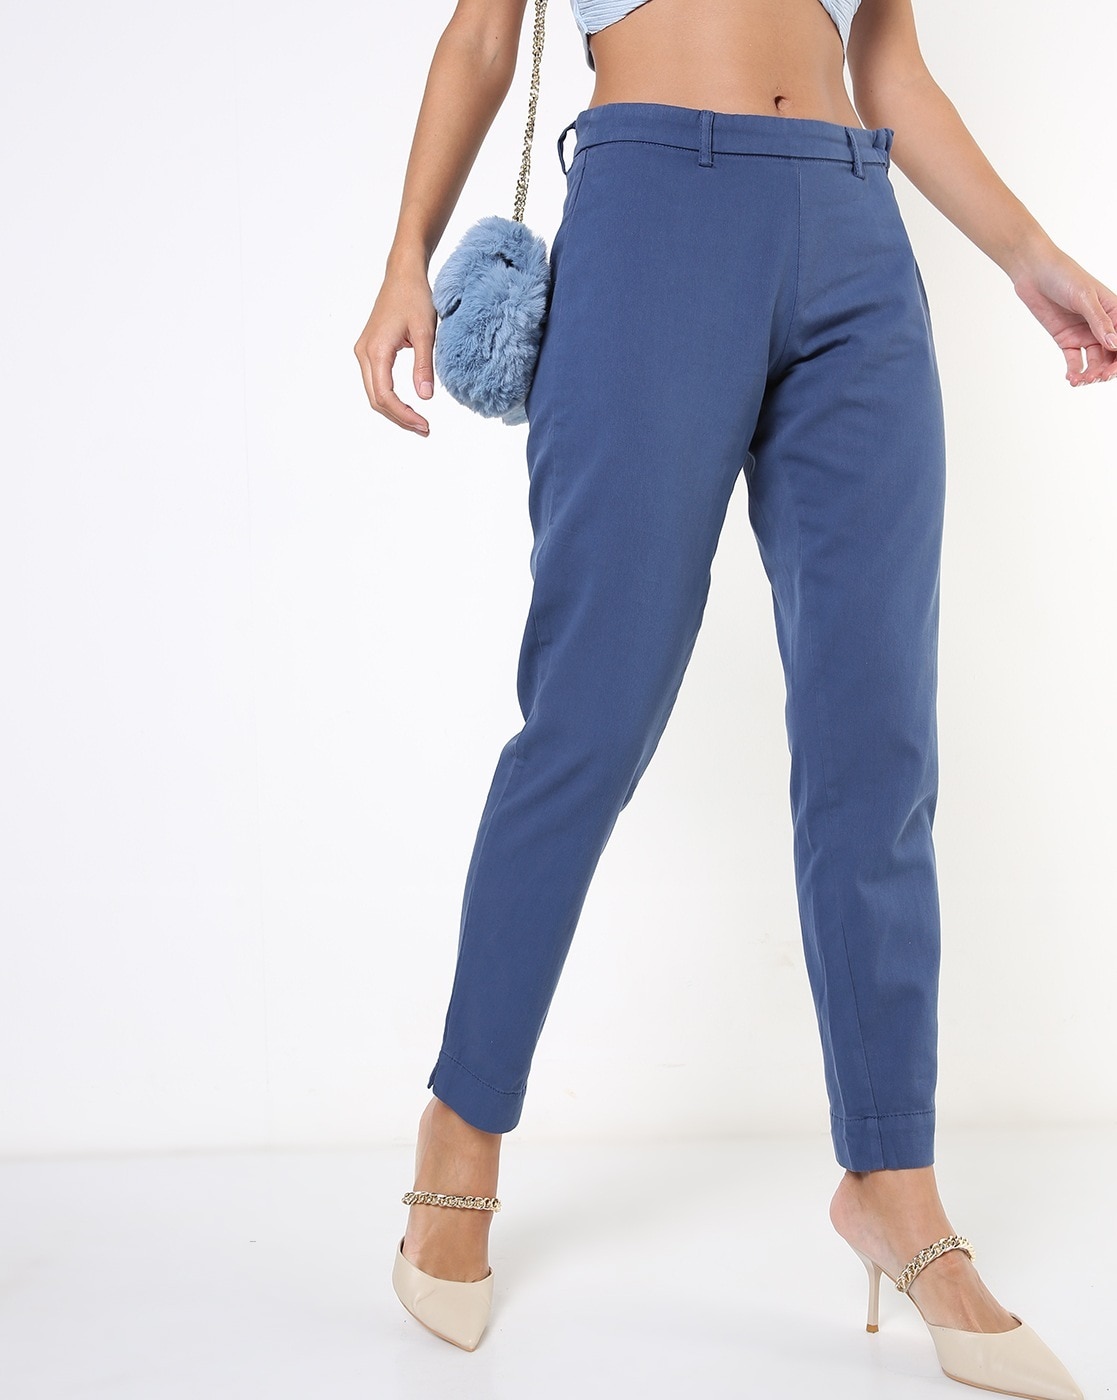 Trousers for Women - The Linen Pleated Trousers Indigo